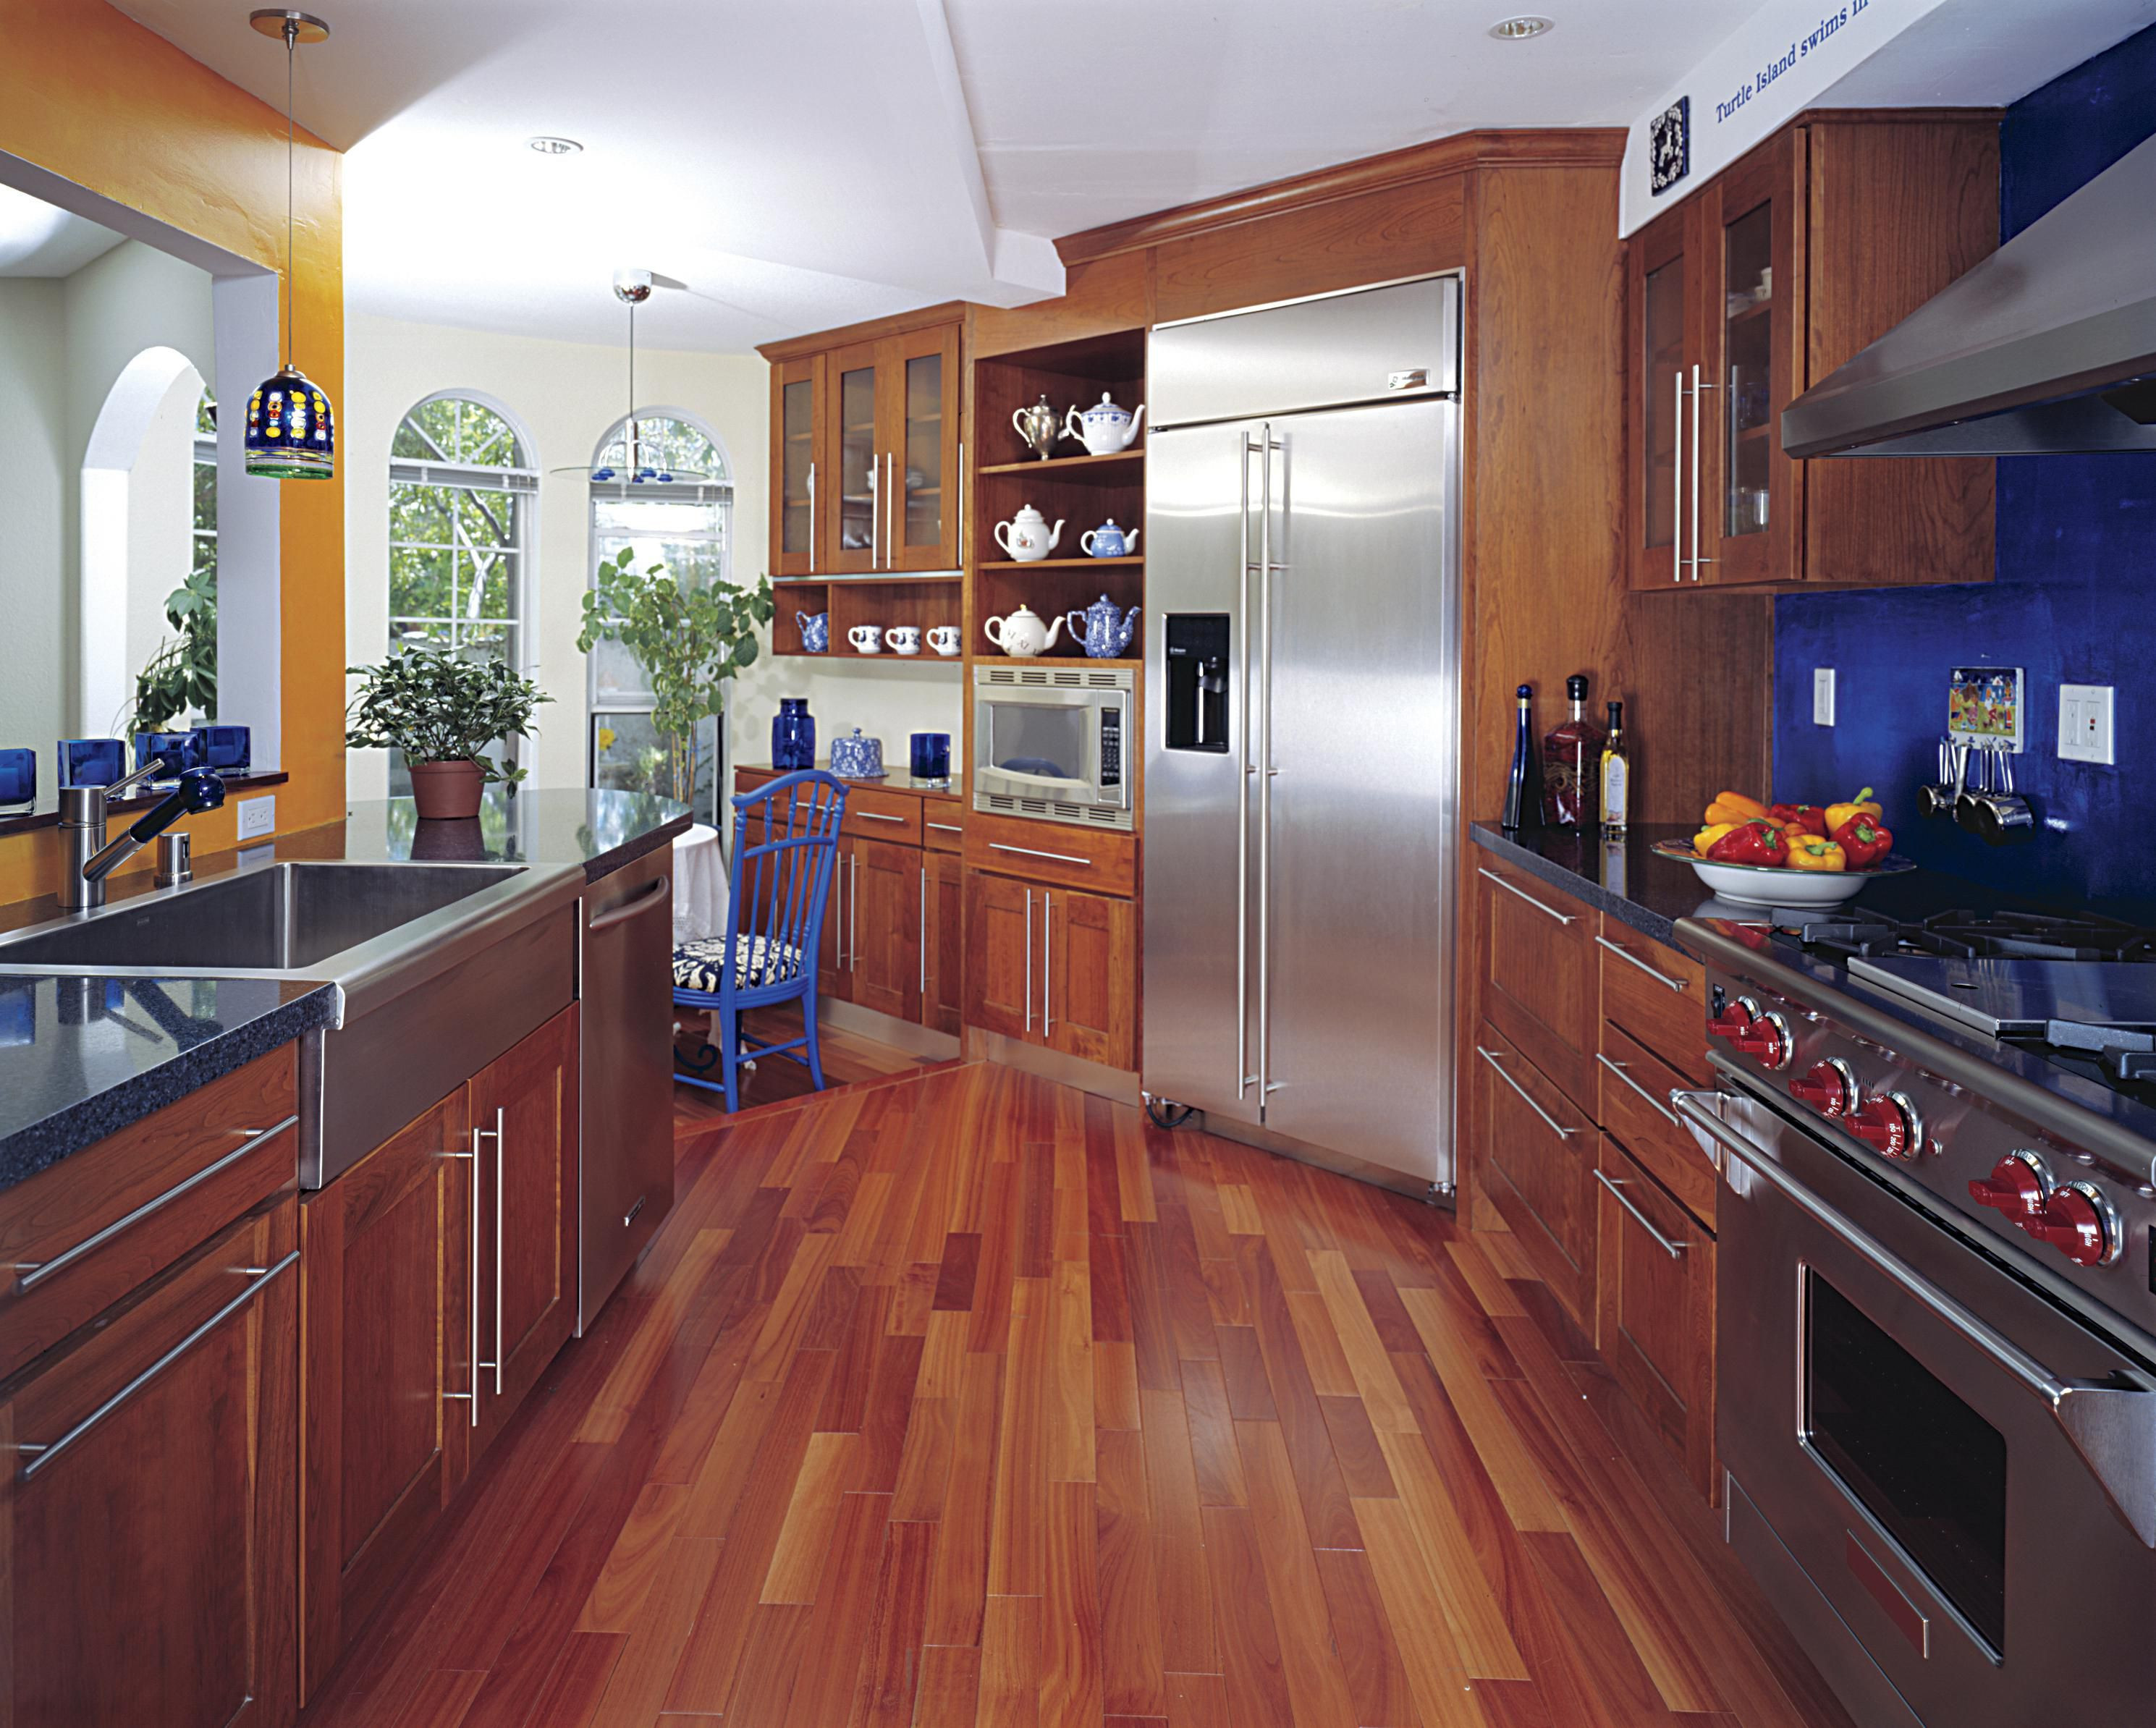 22 Awesome are Dark or Light Hardwood Floors Better 2024 free download are dark or light hardwood floors better of hardwood floor in a kitchen is this allowed pertaining to 186828472 56a49f3a5f9b58b7d0d7e142